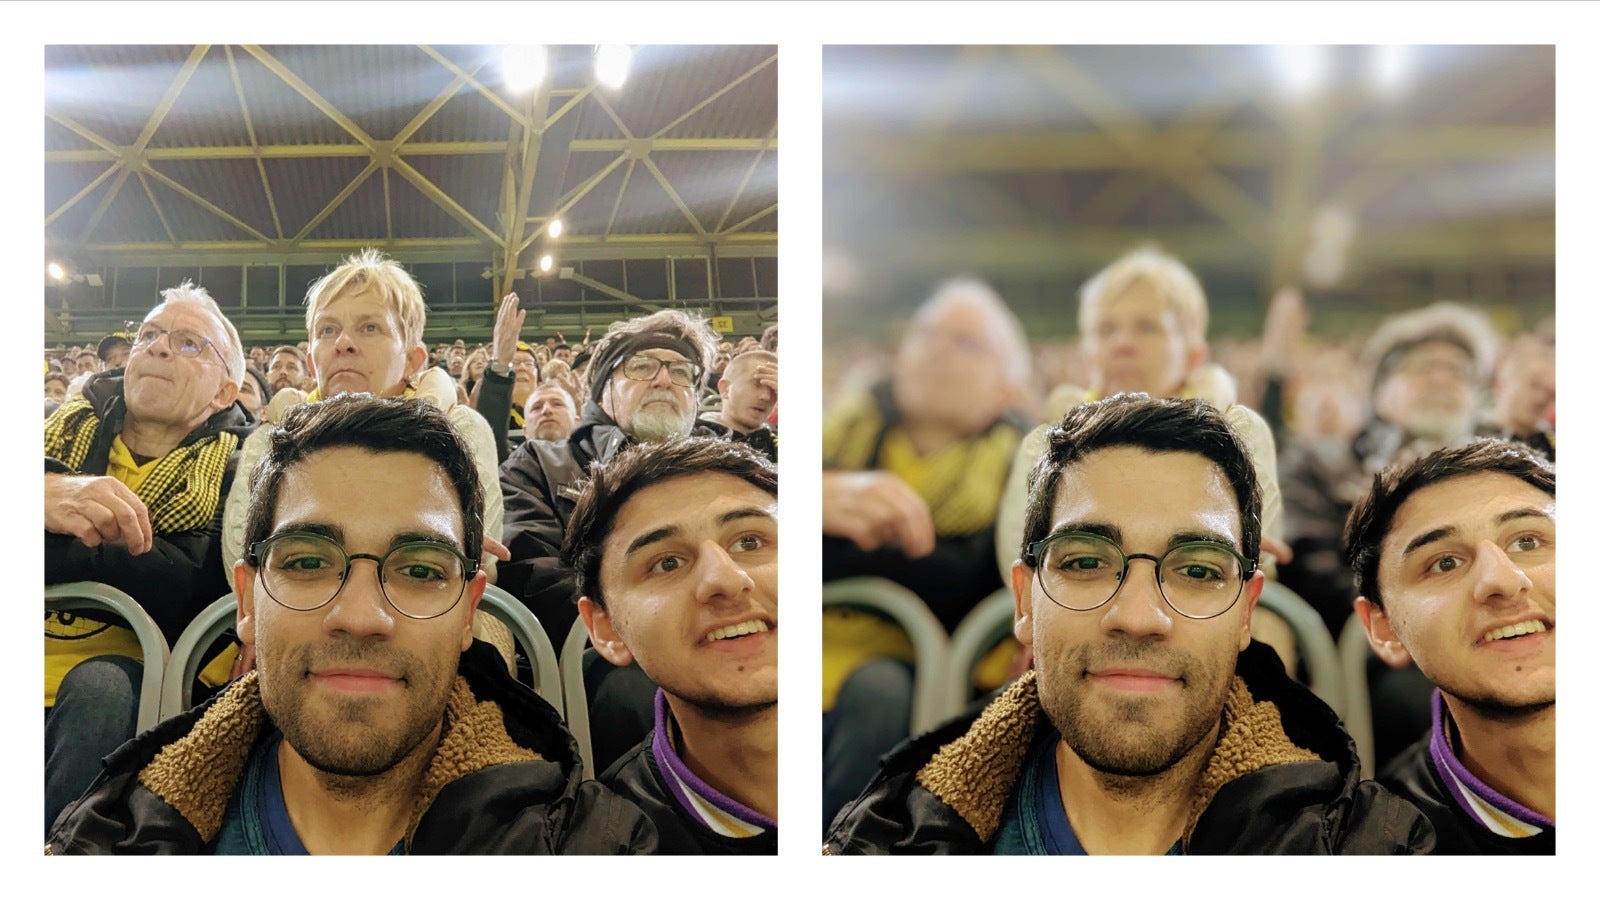 The Pixel 7 Pro is one of the only phones out there that can help you fix a photo. Here, I've applied a Portrait Blur, Portrait Lightning and a filter on the photo on the right, all of which the Pixel 7 Pro lets you do after the photo was taken. - Pixel 7 Pro camera issues prove years-long lead over Apple and Samsung is gone - what went wrong?